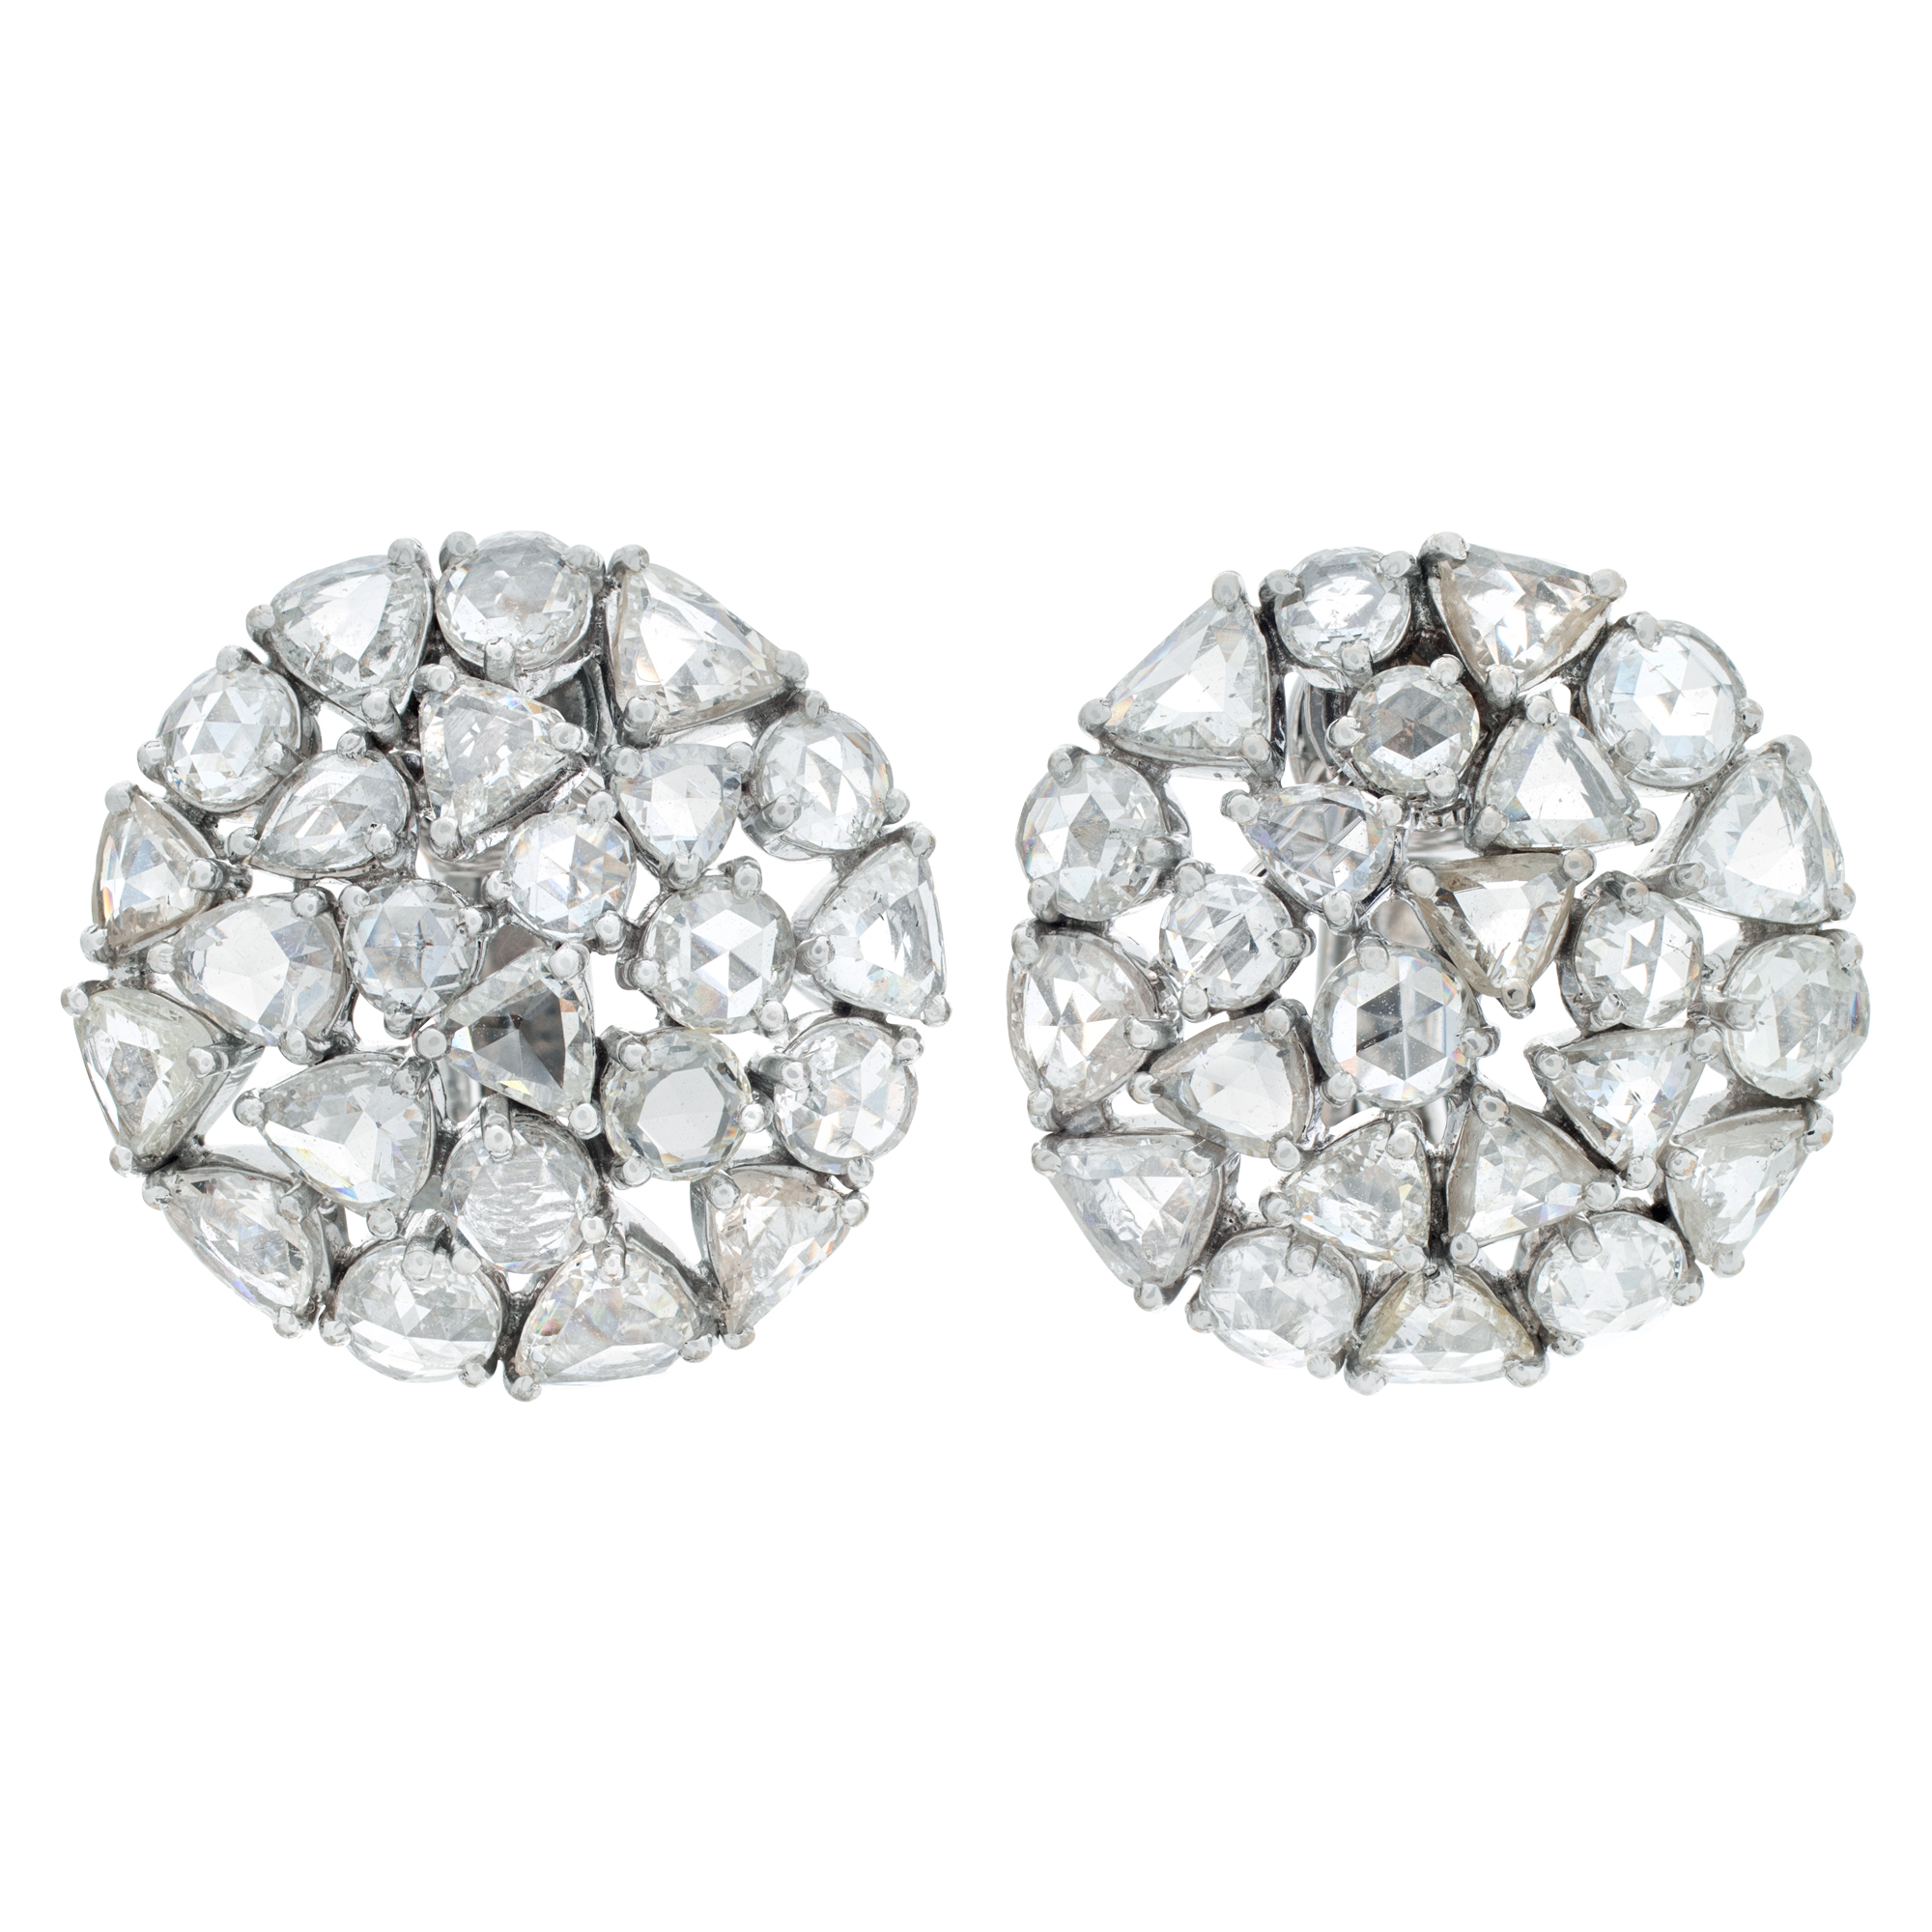 Round, triangular and pear shape, rose cut diamond earrings set in 18k white gold. Total approx. carat weight 6.82 carat